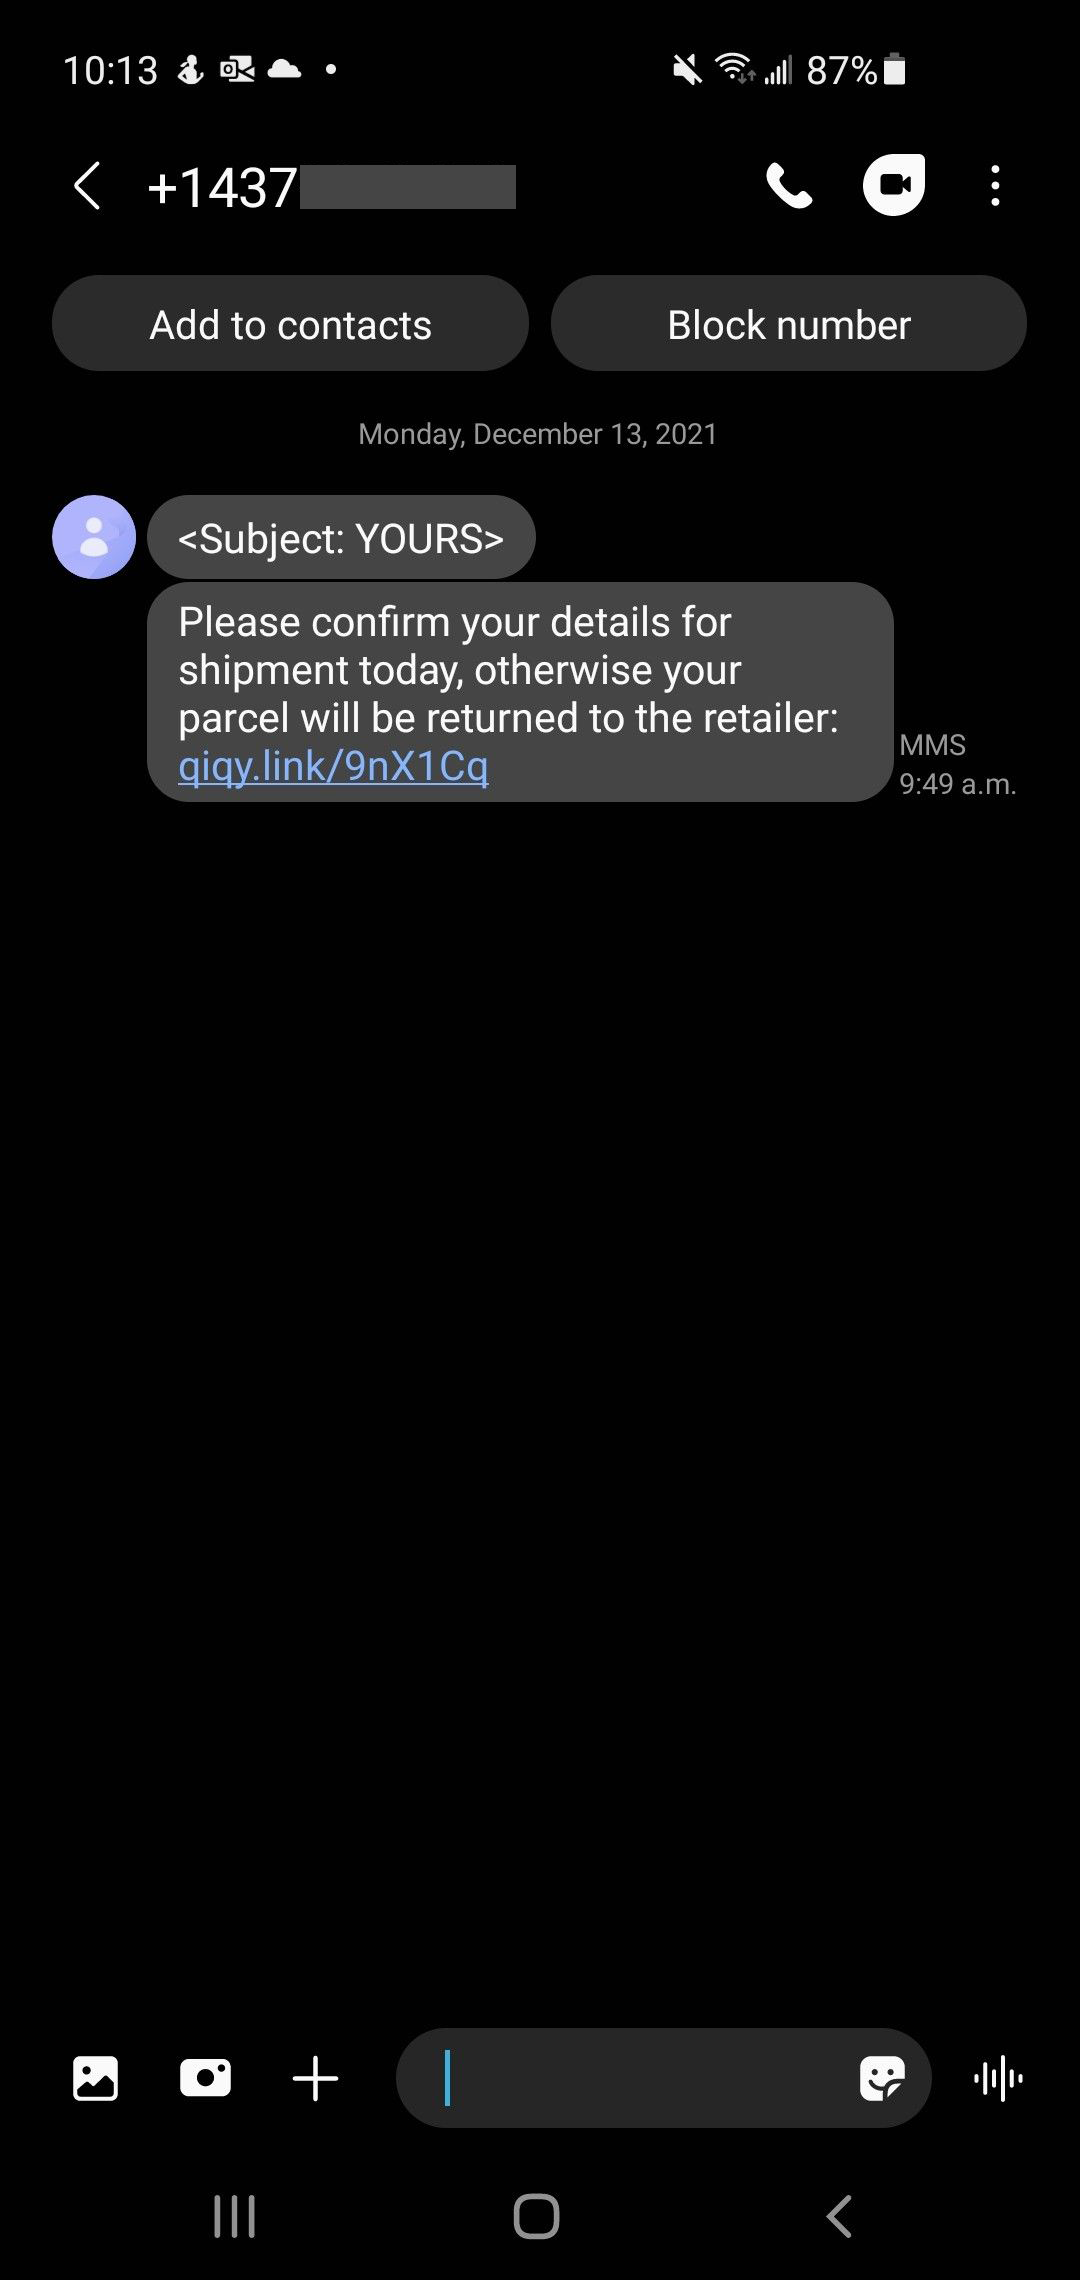 Alt text: A text message displays on a phone screen. It reads: (100001)Deposit: You Received a Refund #CA767960. http://bitly.ws/jSr5.